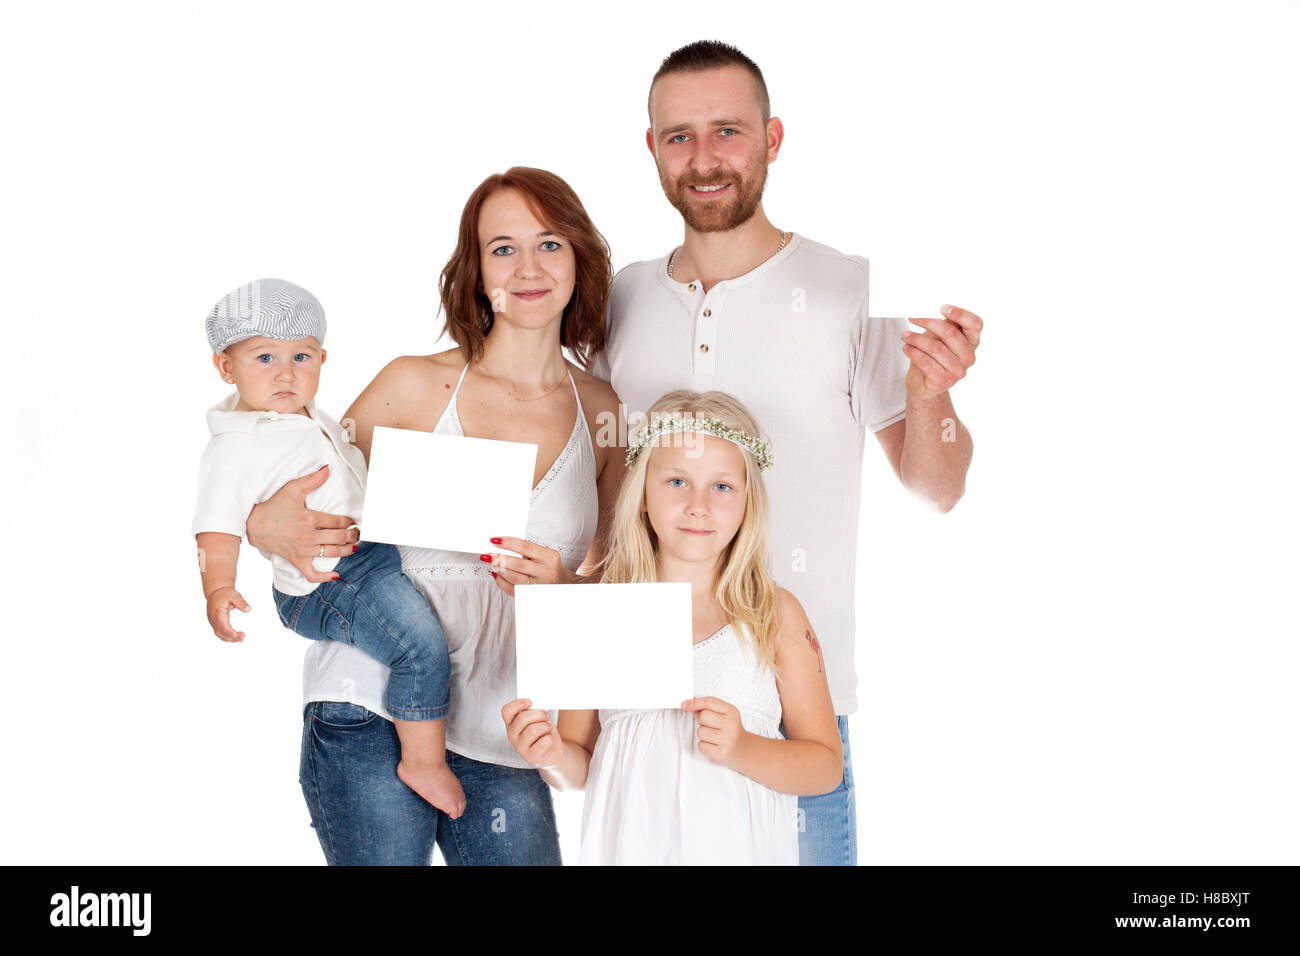 family, a group of people in white shirts and jeans holding a card Stock Photo